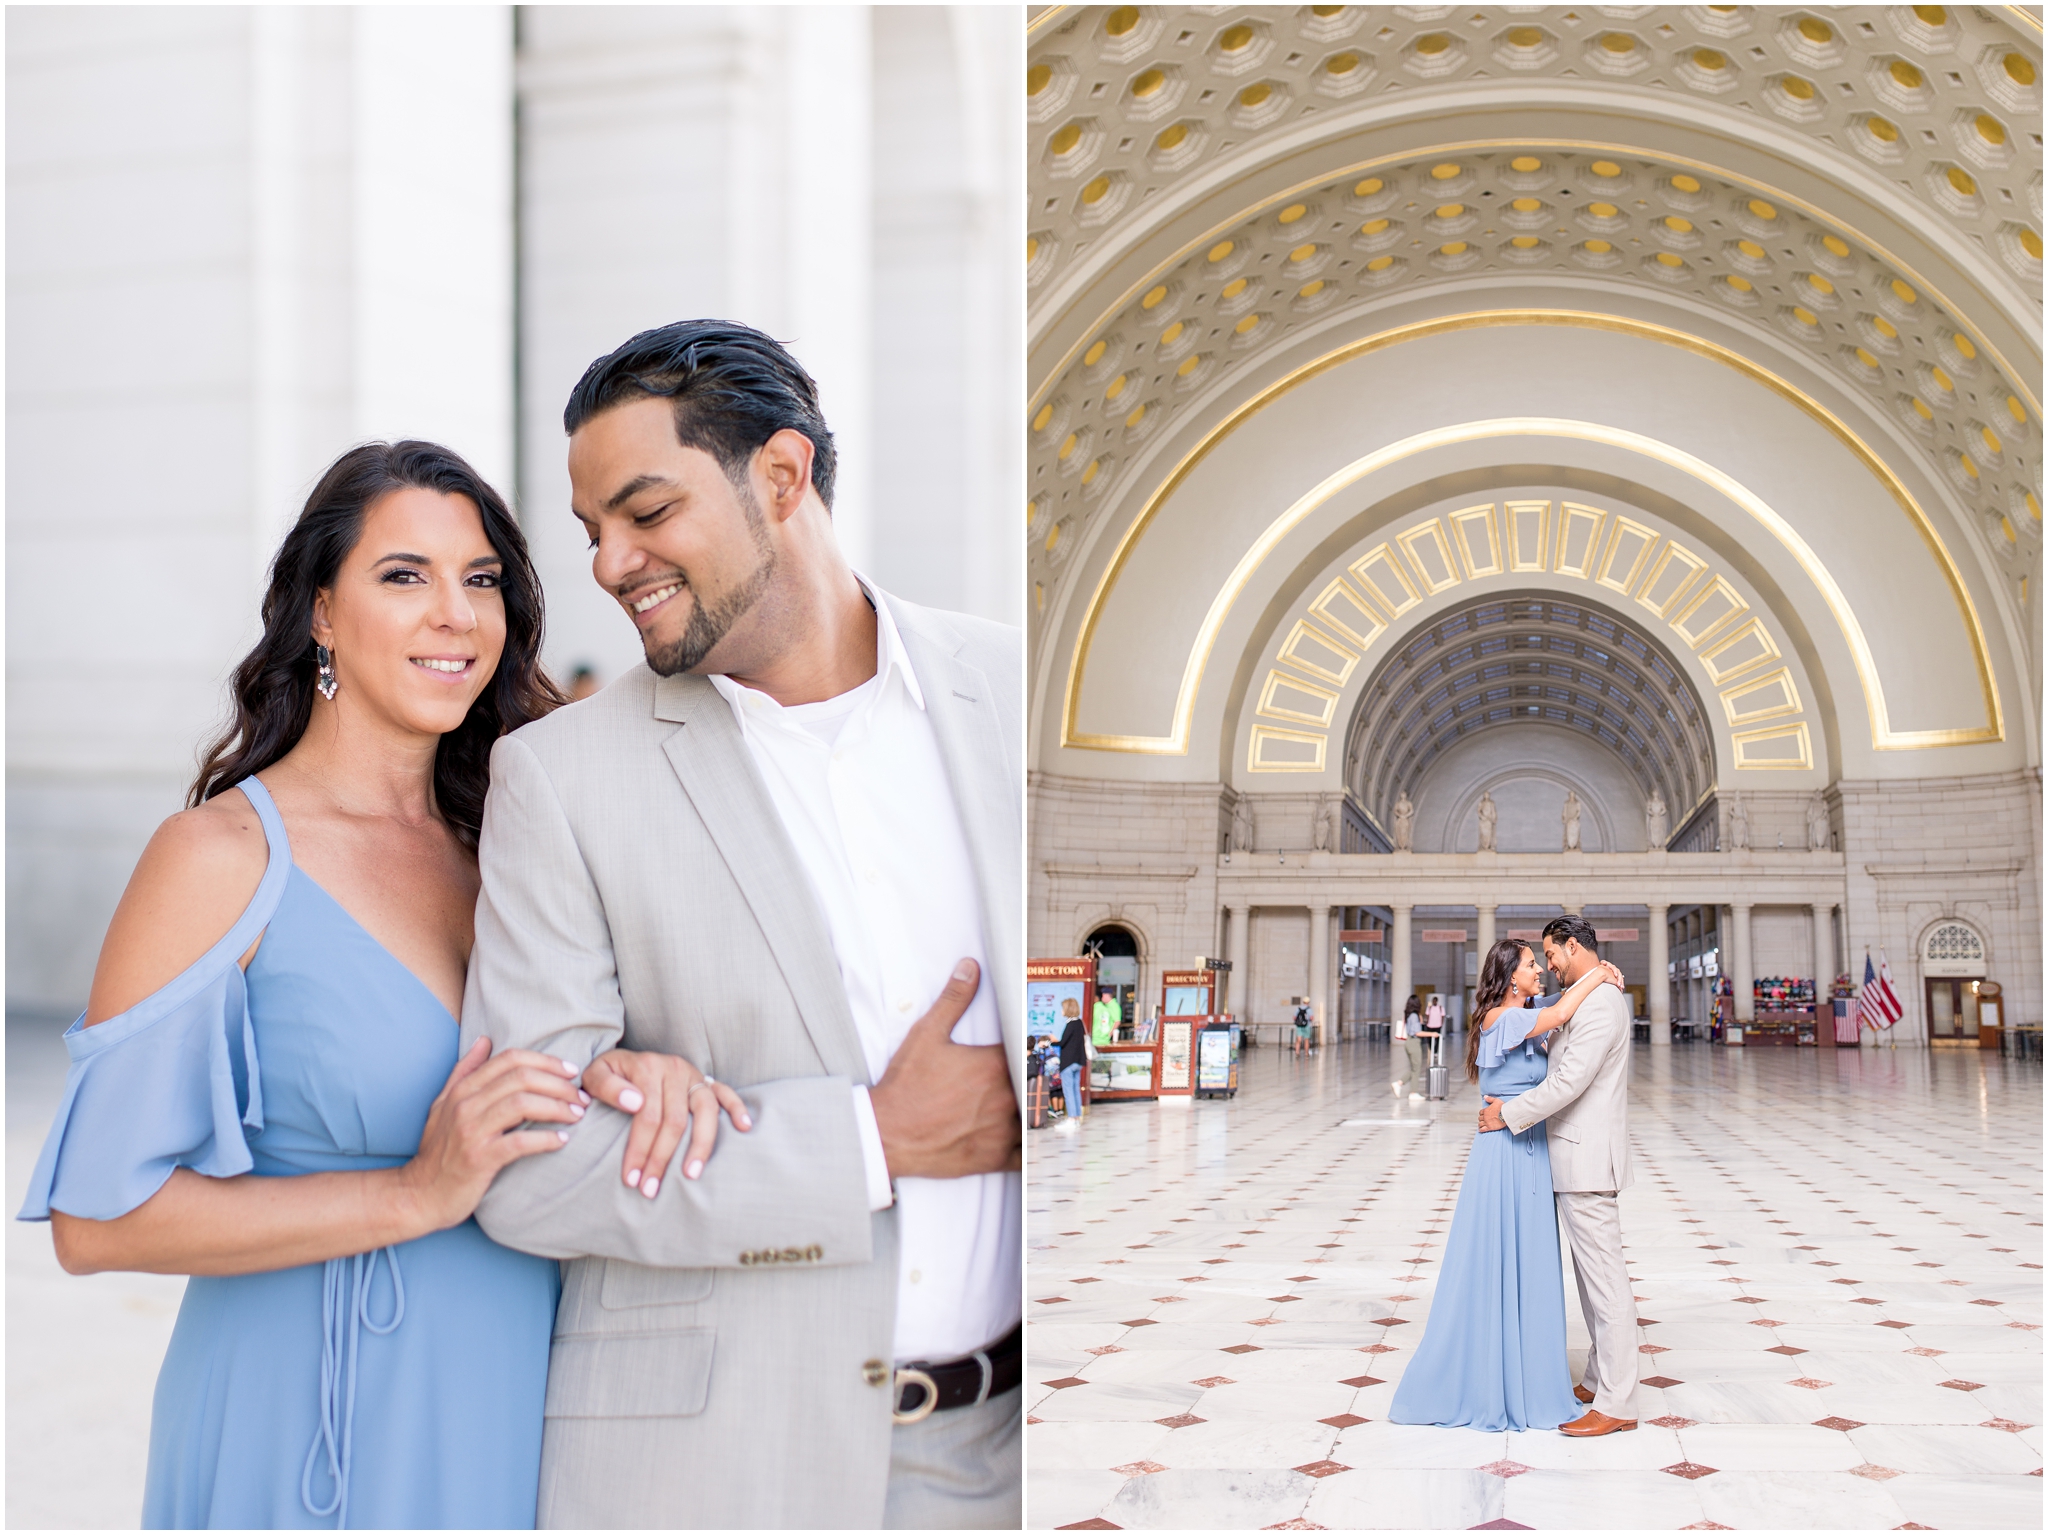 Union Station Wedding photographer captured Union Station engagement session in Washington DC on Capitol Hill. Yvette wore a formal engagement dress from Lulu’s for their formal DC engagement session in the fall. Photographed by DC wedding photographer, Taylor Rose Photography.